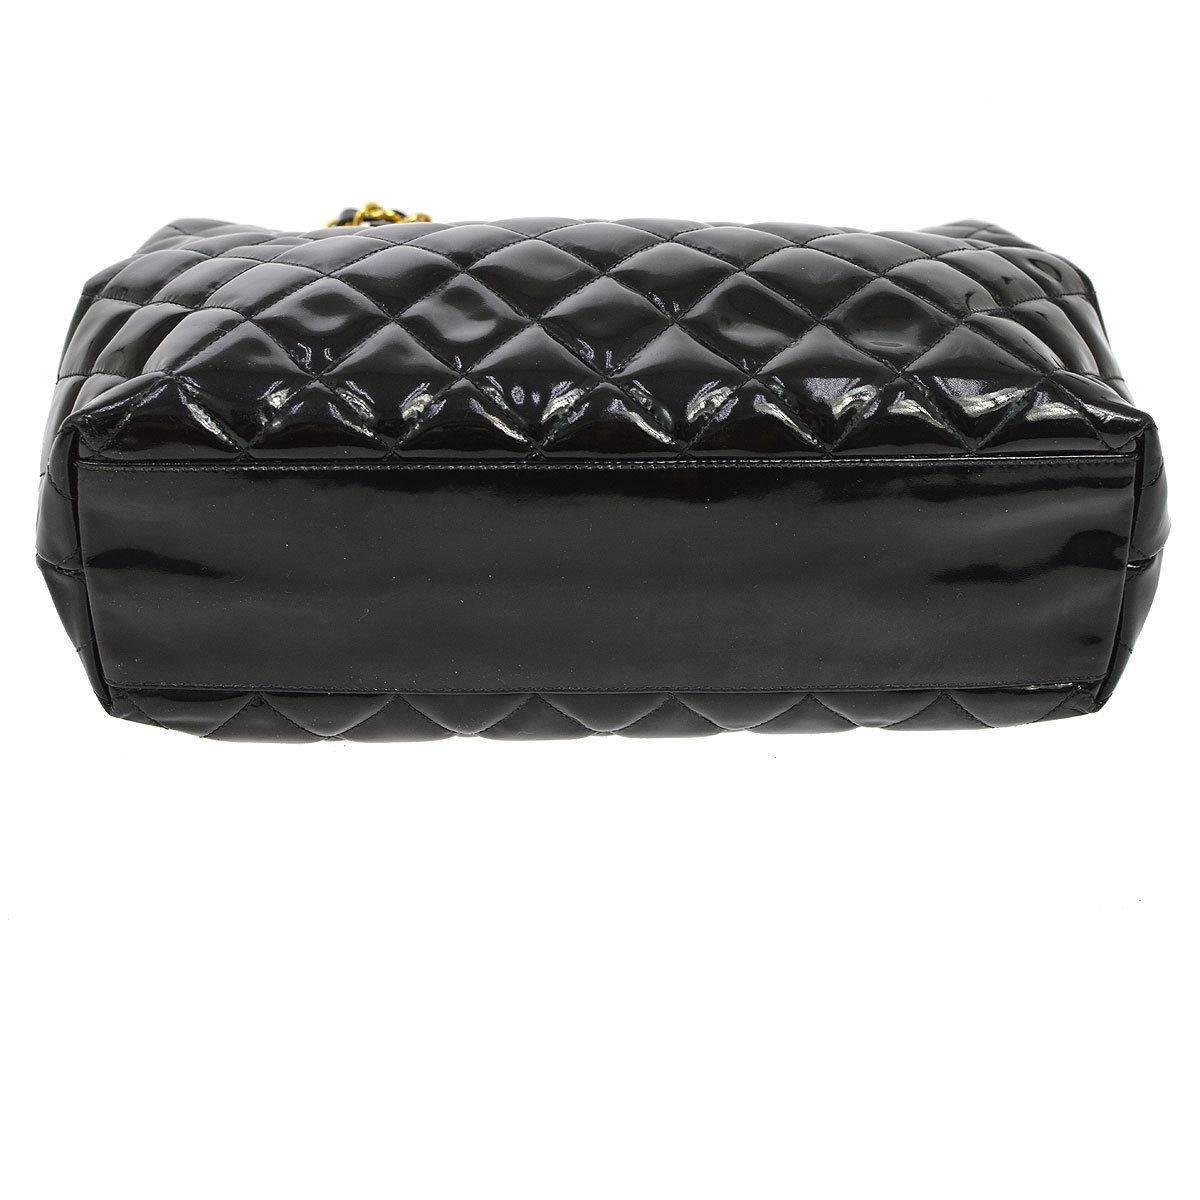 Women's Chanel Black Quilted Patent Leather Gold Charm Carryall Evening Shoulder Bag